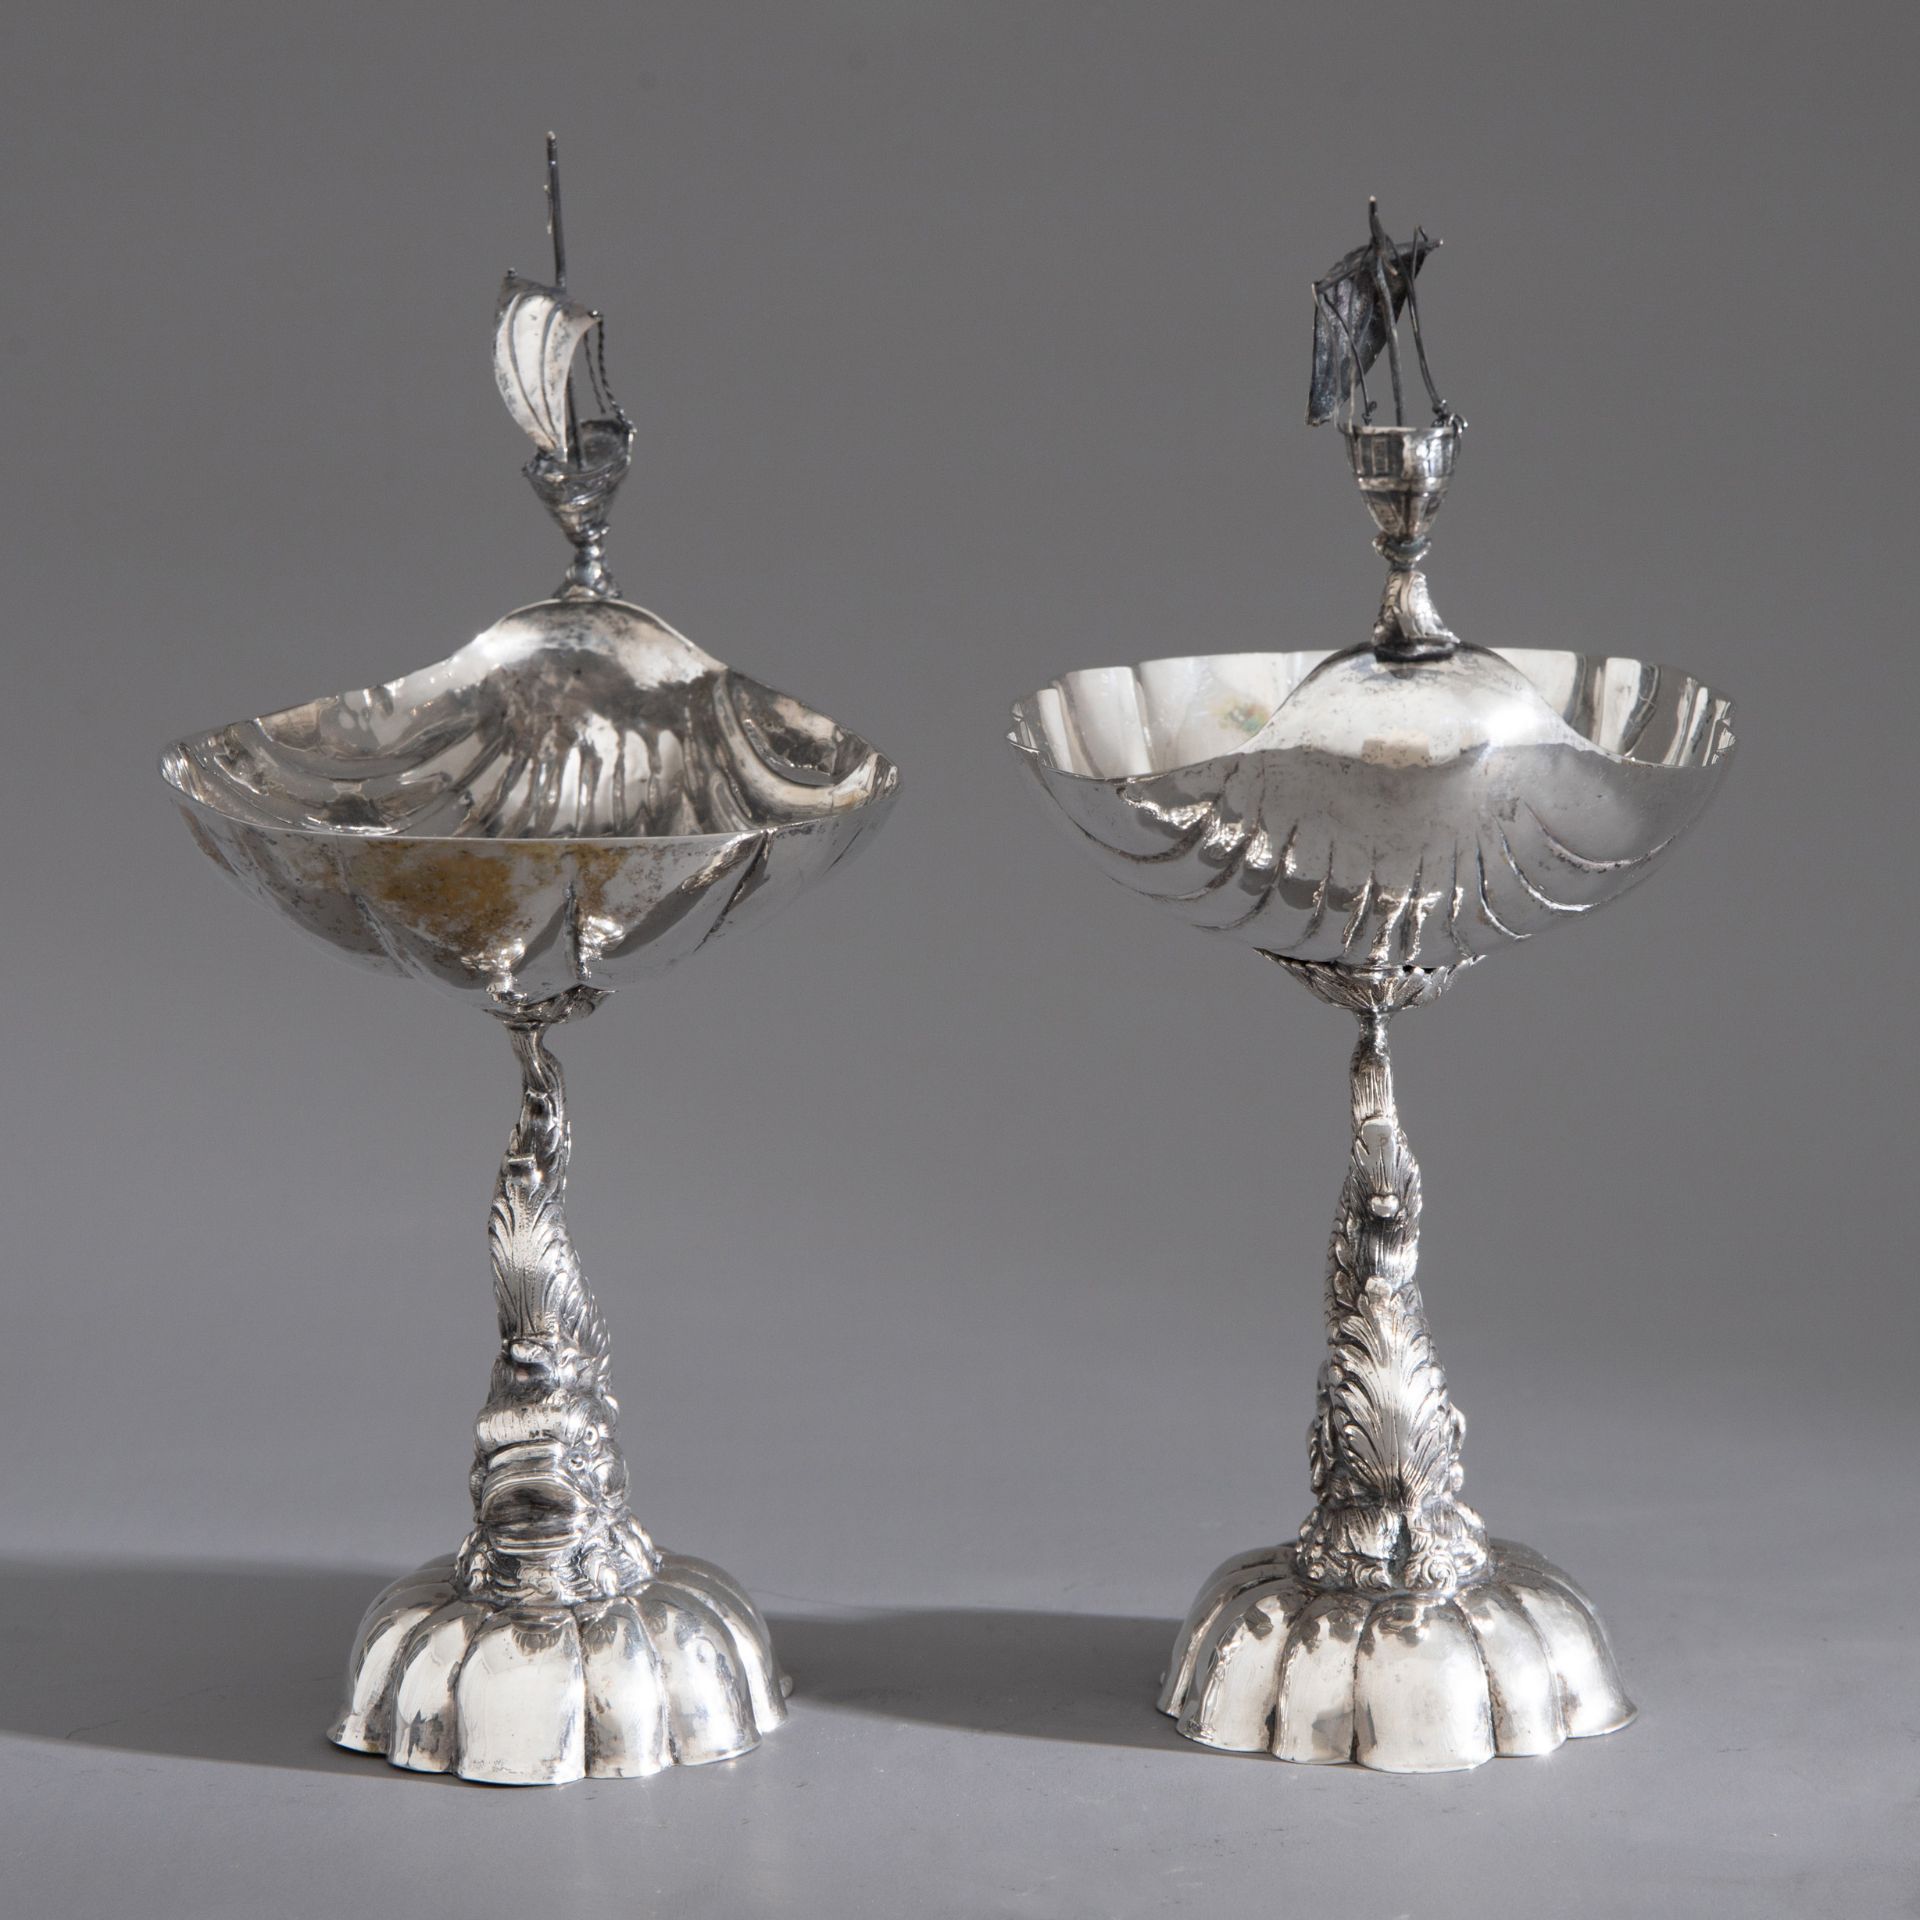 Pair of German silver bowls with fish - Image 5 of 7